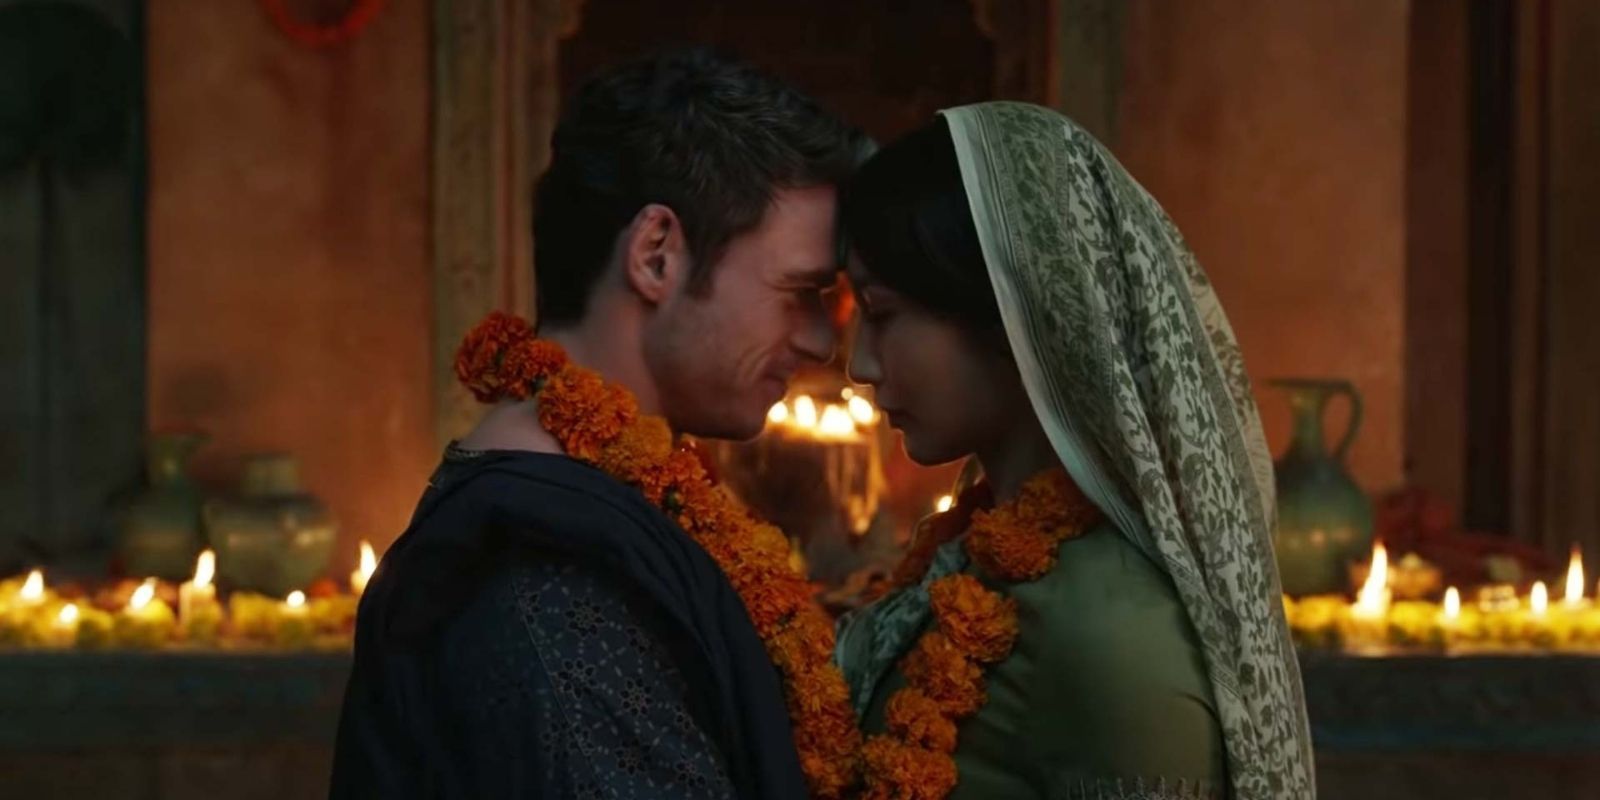 Ikaris and Sersei in what appears to be an Indian wedding as featured in Eternals